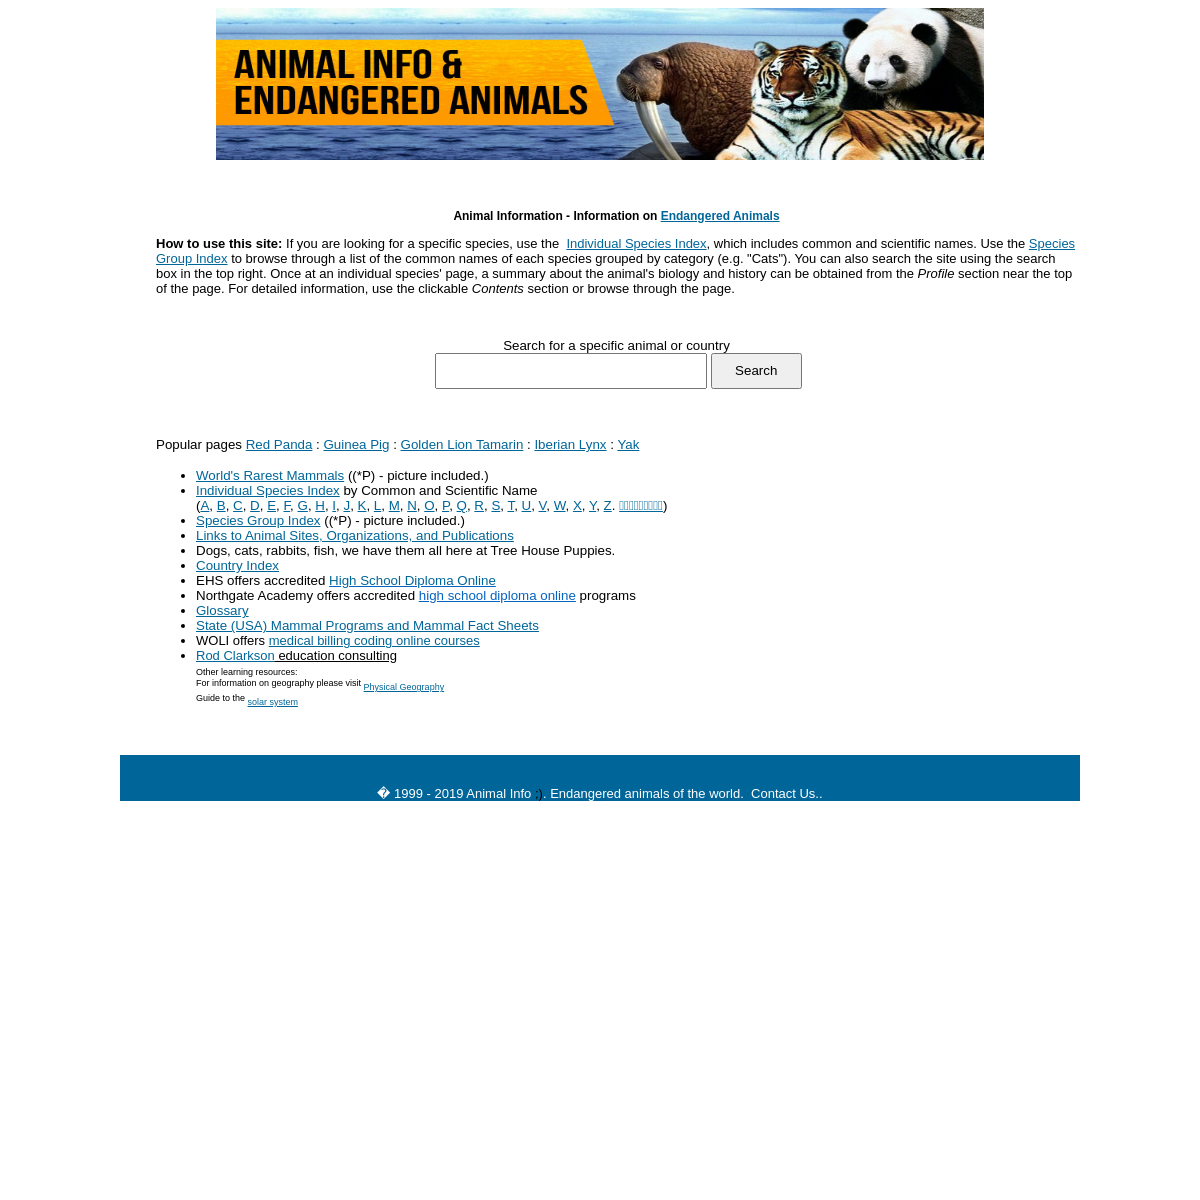 A complete backup of animalinfo.org